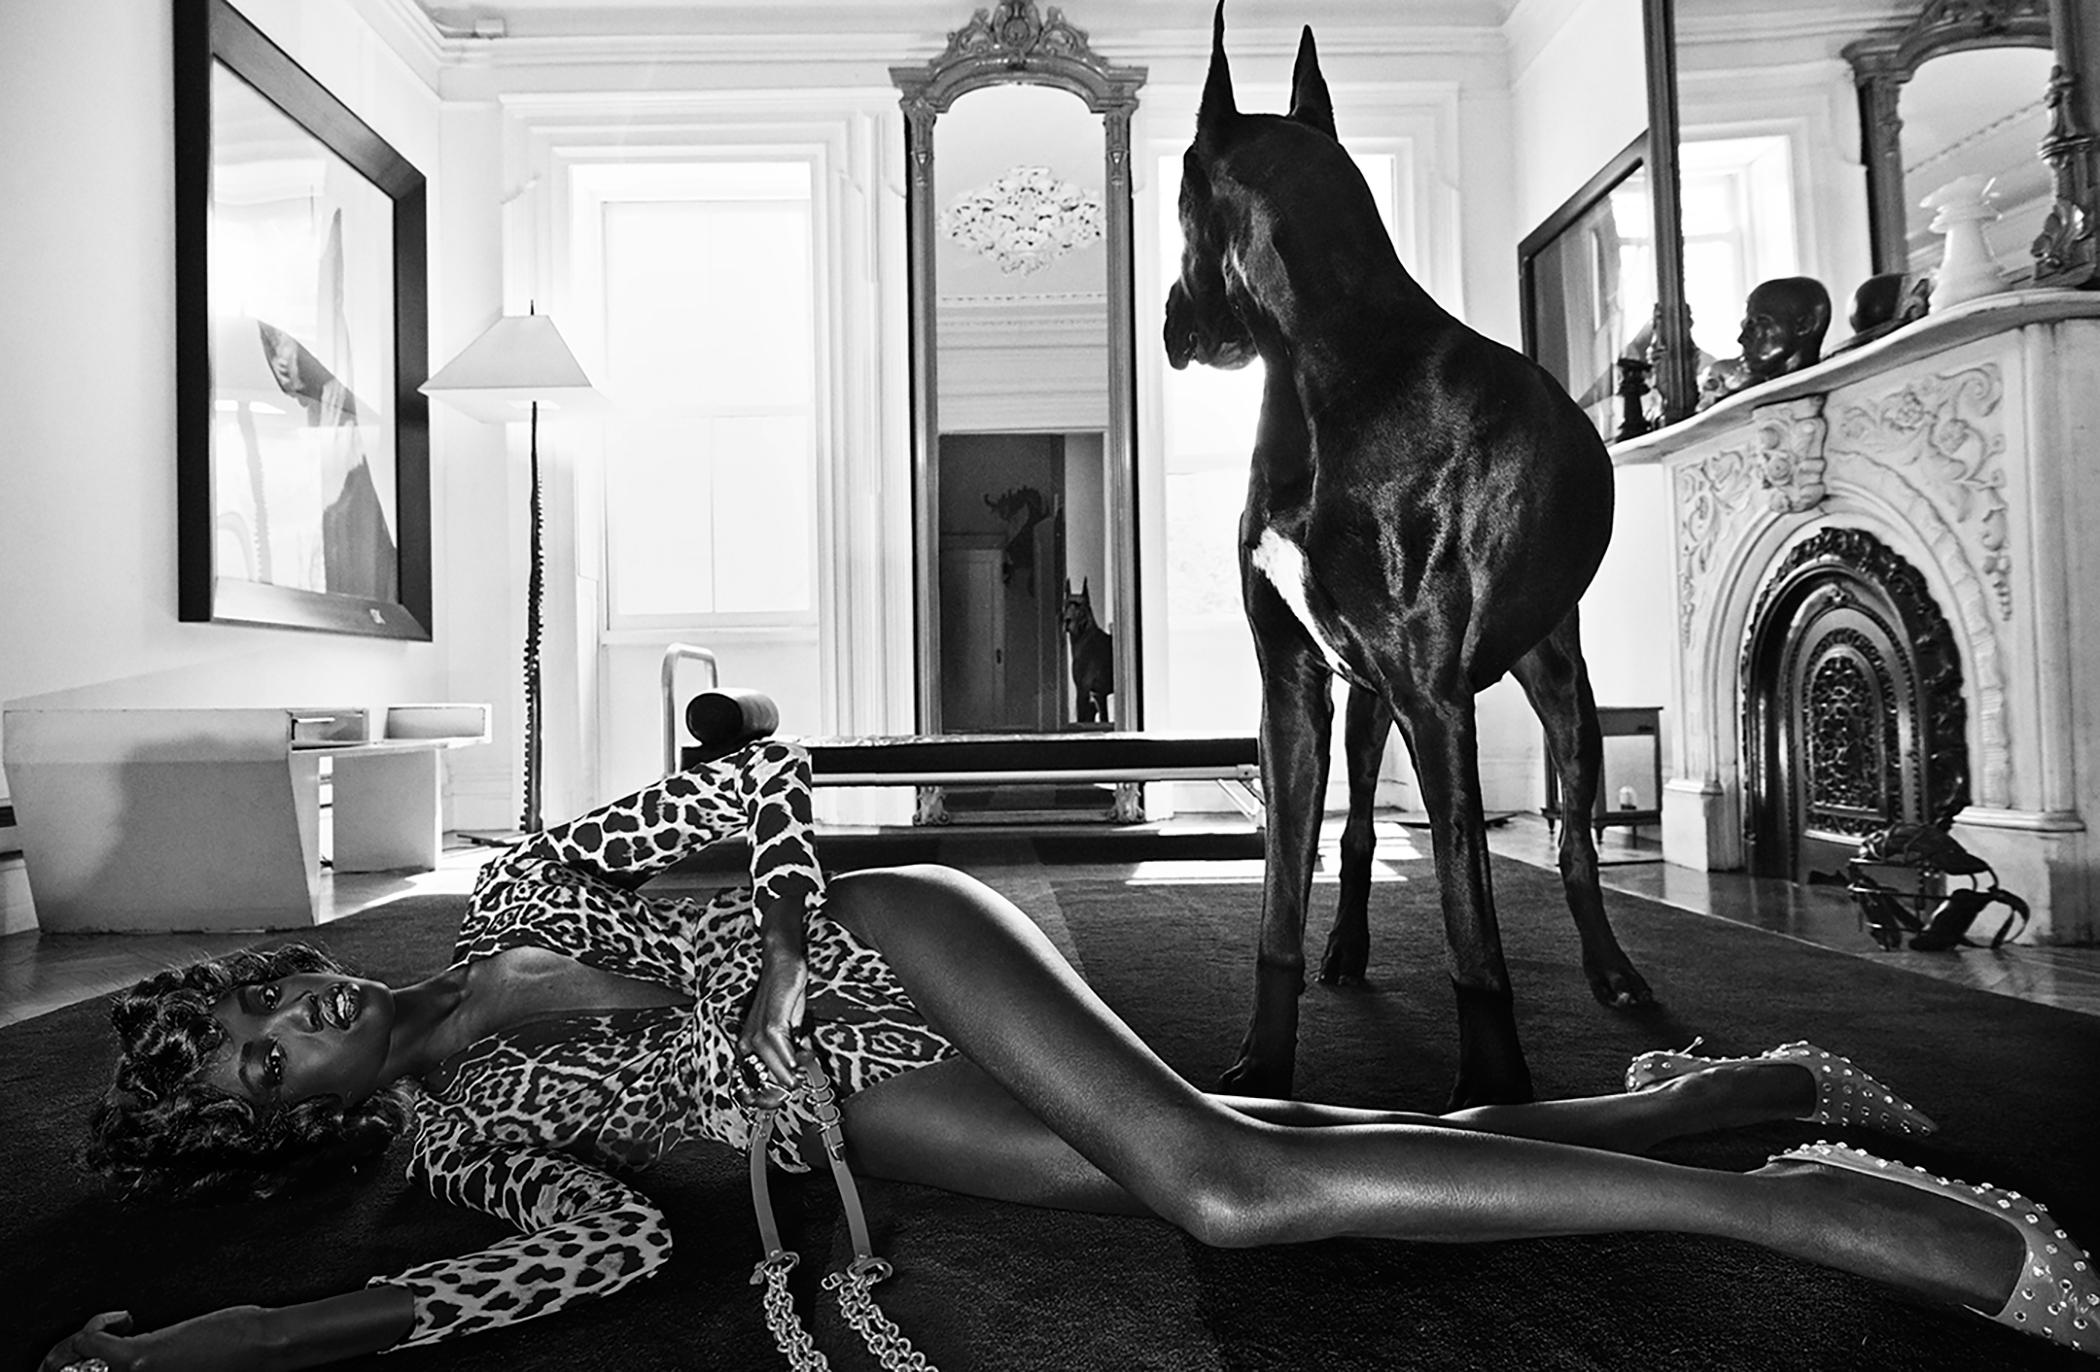 Anok and Prince 04 - Photograph by Steven Klein